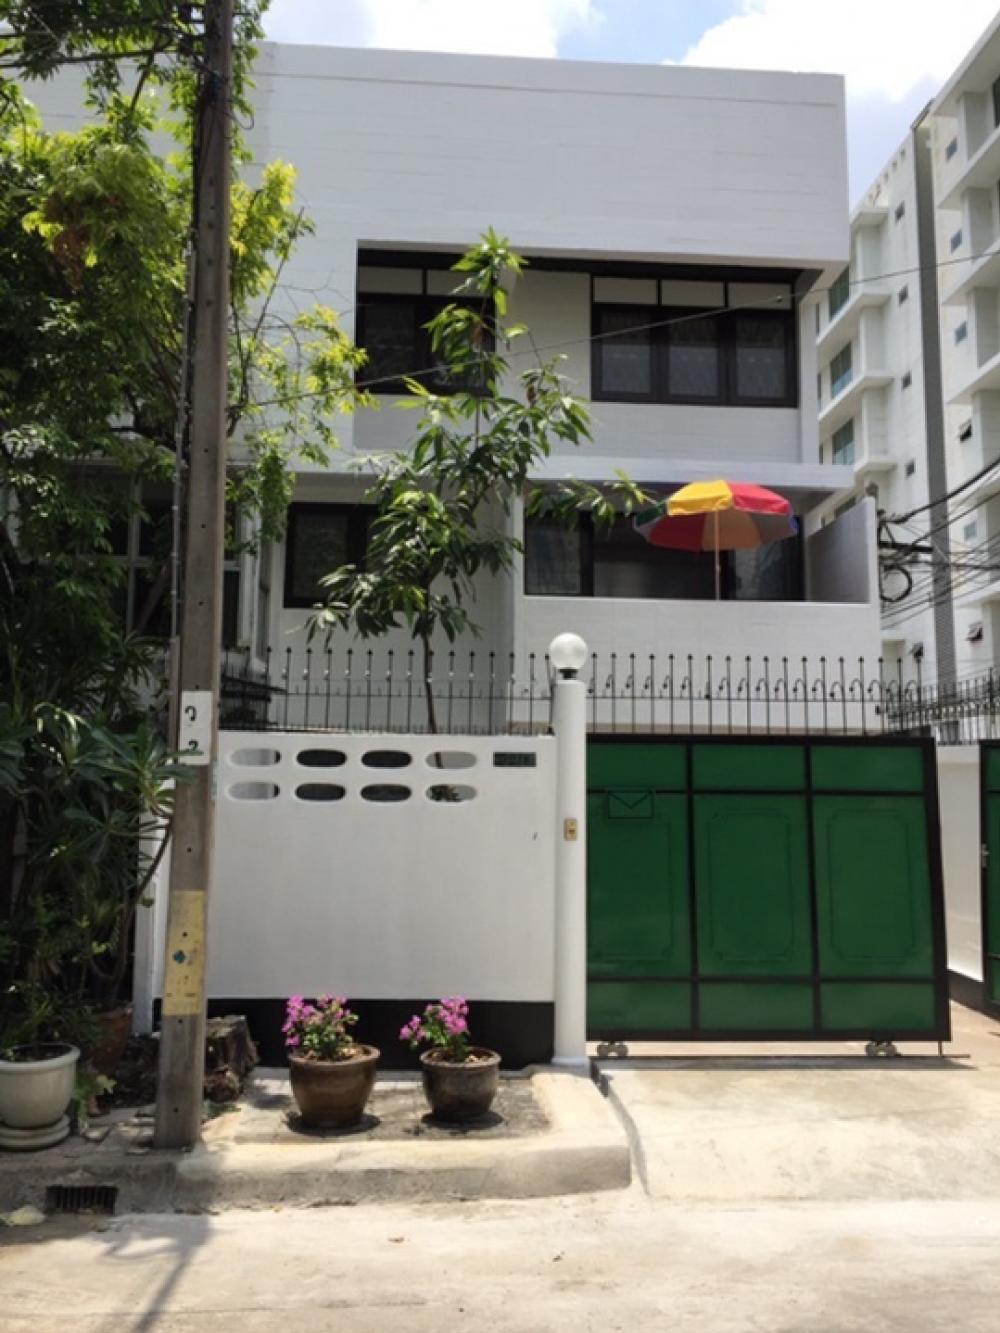 For RentRetailSathorn, Narathiwat : For rent, Sathorn townhouse, cafe, central kitchen, Chef Table (2 parking spaces) can rent for Airbnb or other businesses.